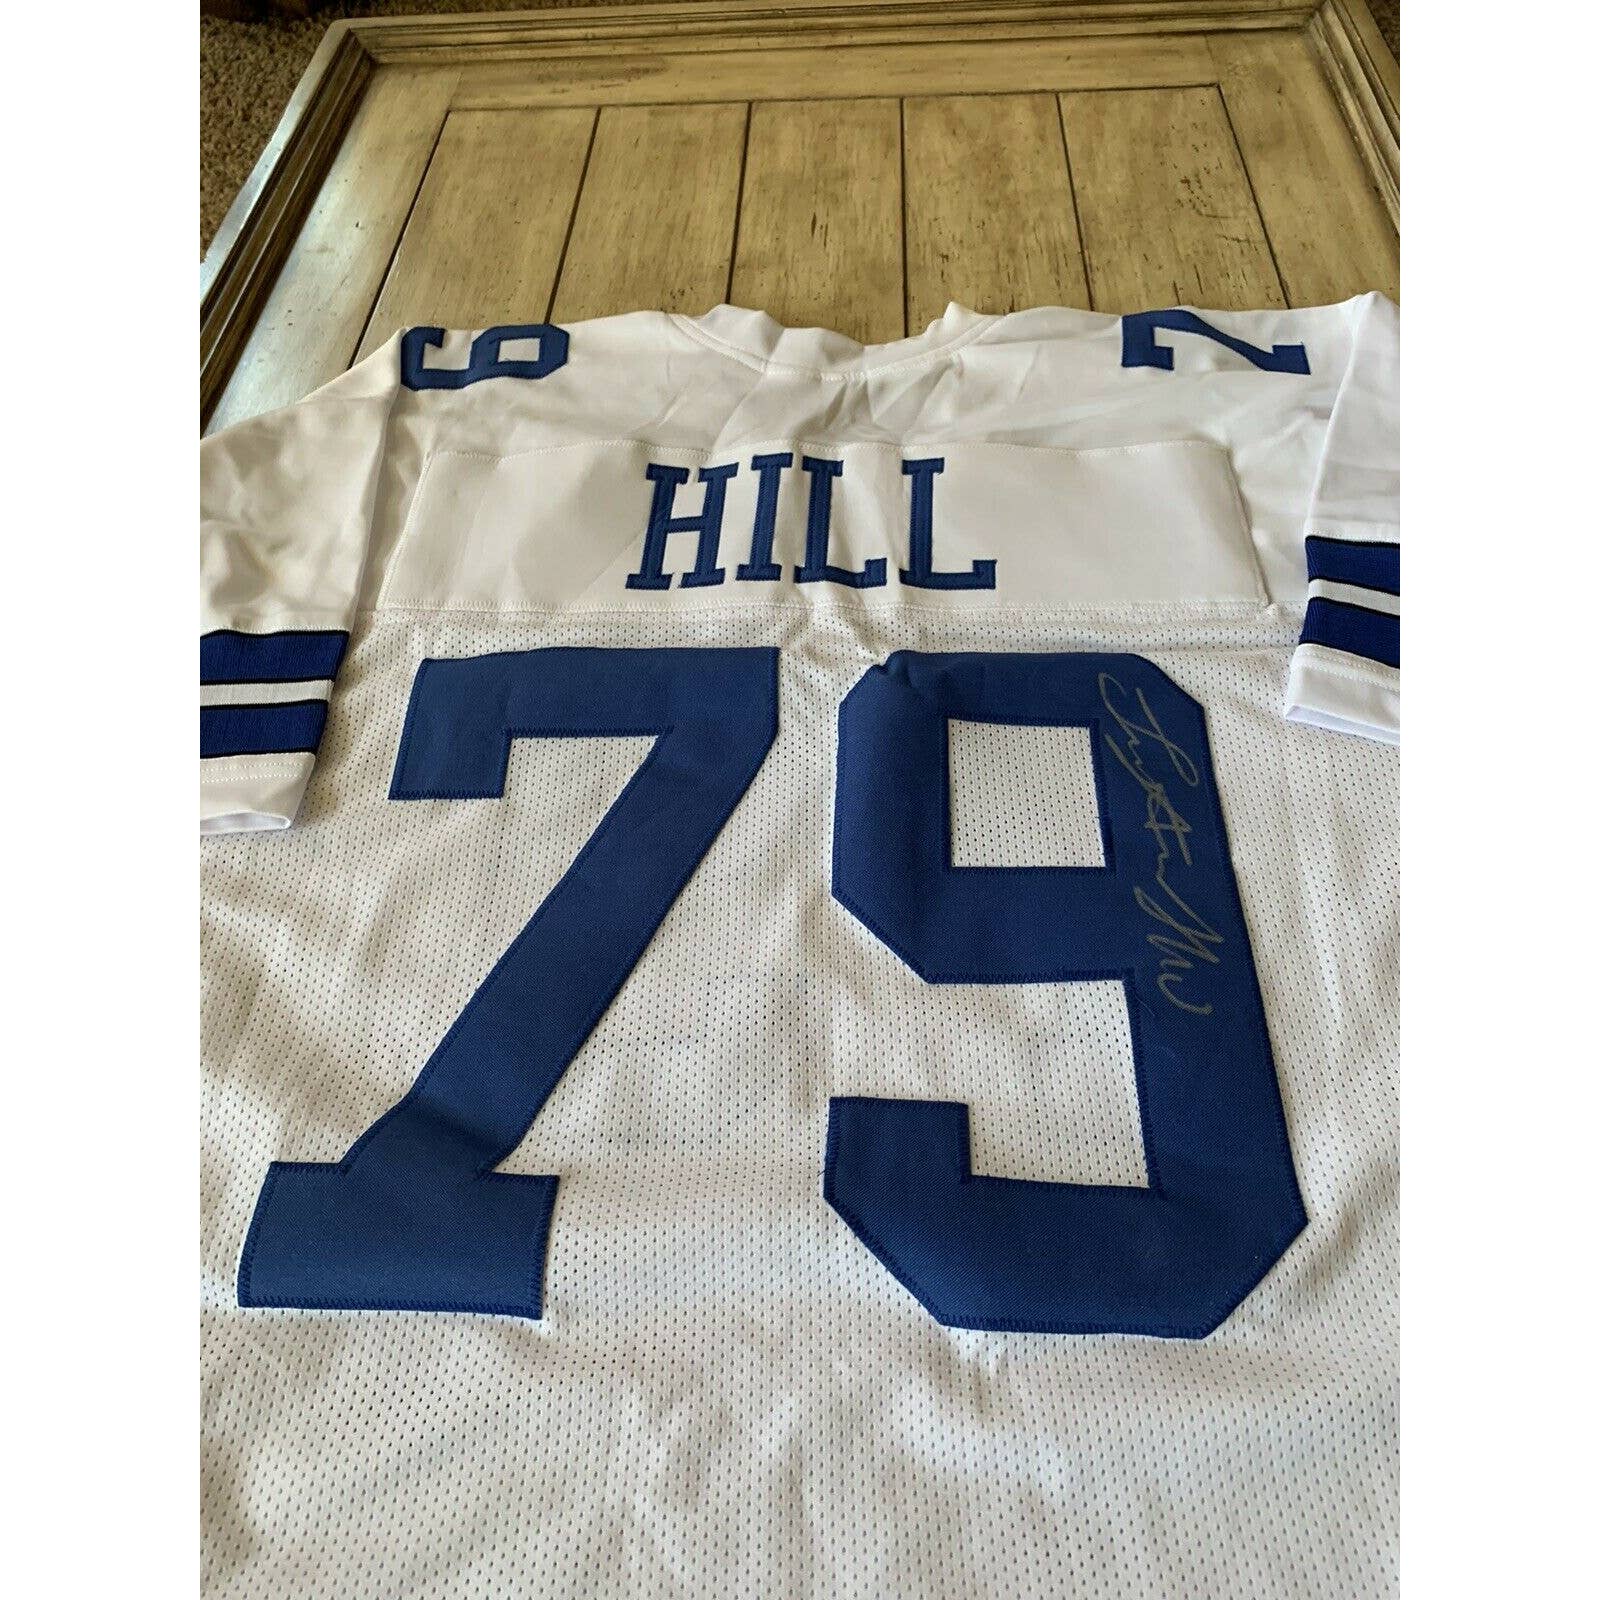 Trysten Hill Autographed/Signed Jersey Dallas Cowboys - TreasuresEvolved